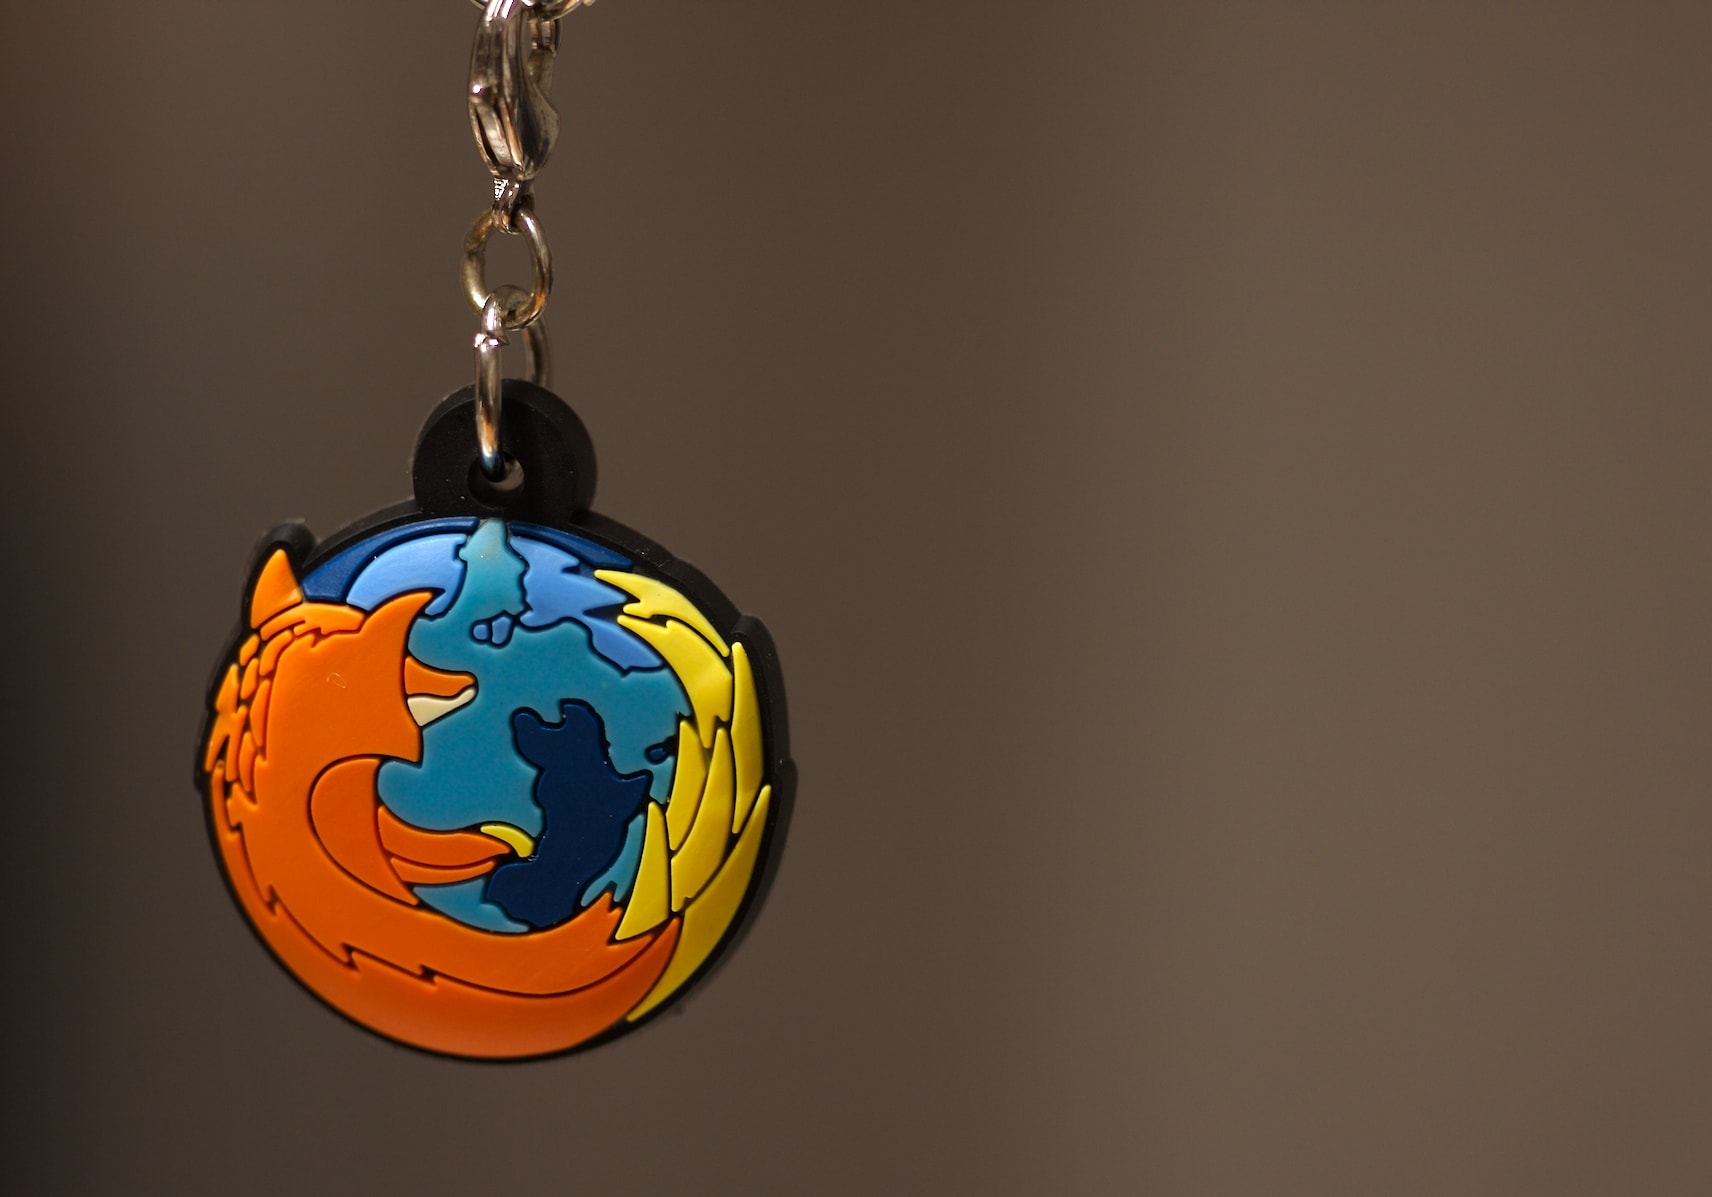 A keychain with the Firefox logo